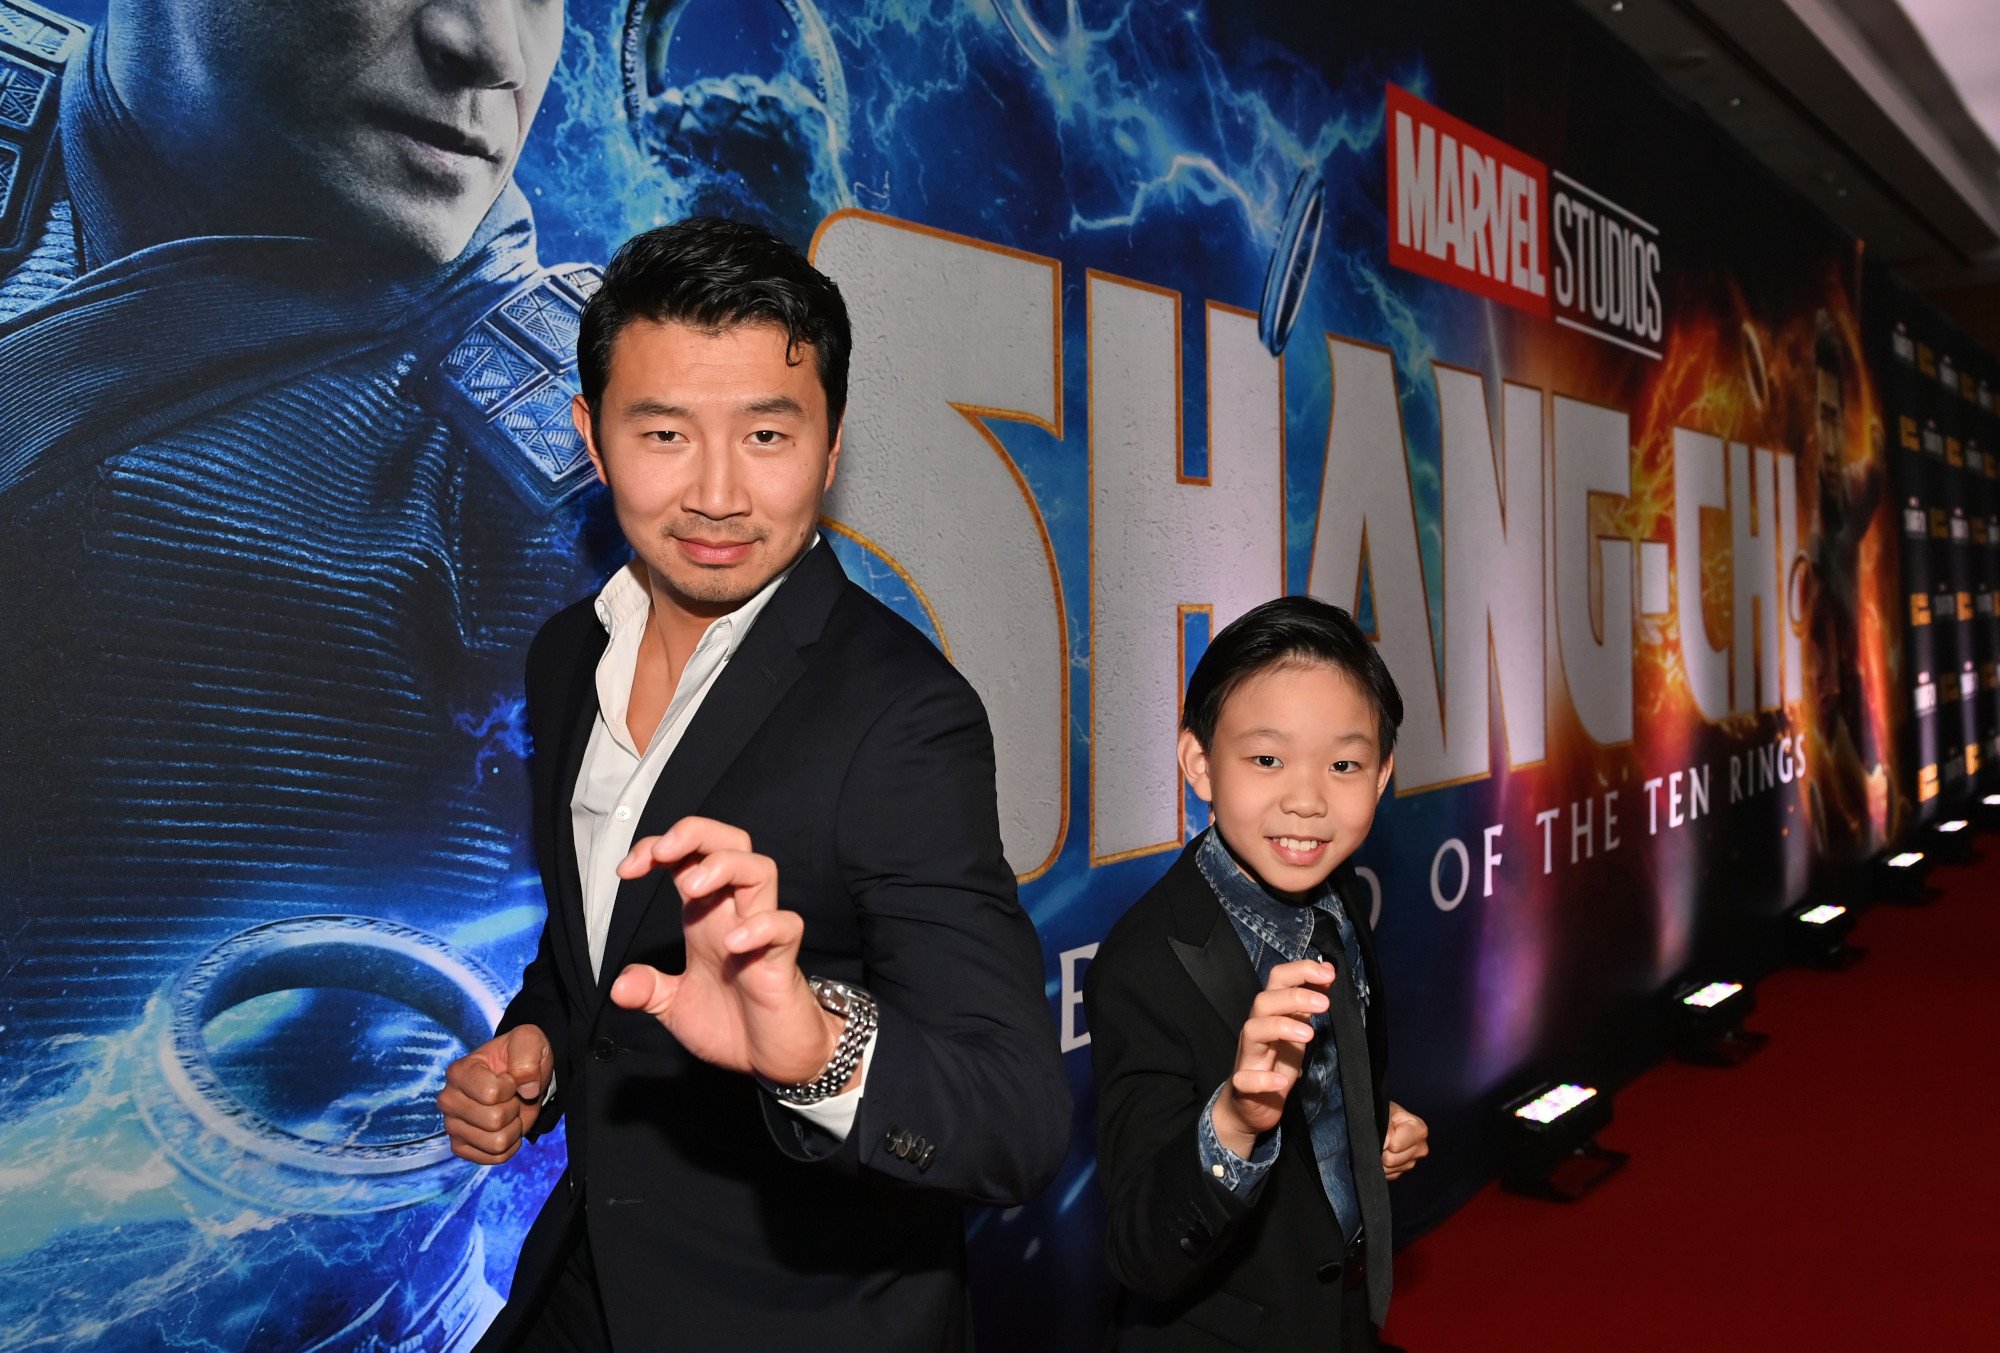 'Shang-Chi and the Legend of the Ten Rings' stars Simu Liu and Jayden Zhang posing in front of a Shang-Chi wall. They're both wearing black suits and have one arm extended making a claw motion.